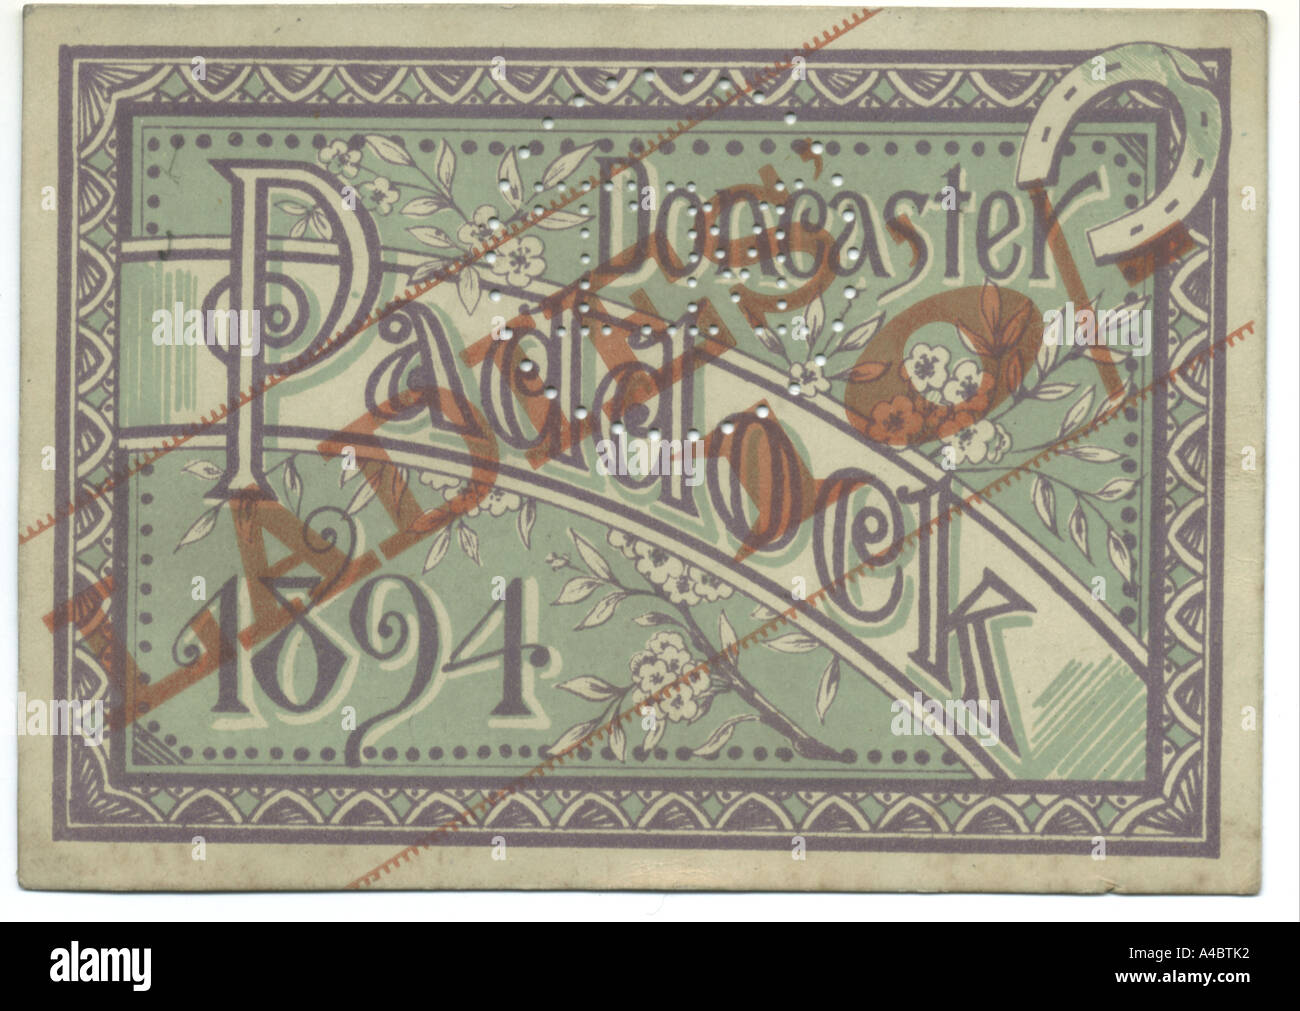 Ladies Paddock ticket for Doncaster Races 1894 Stock Photo